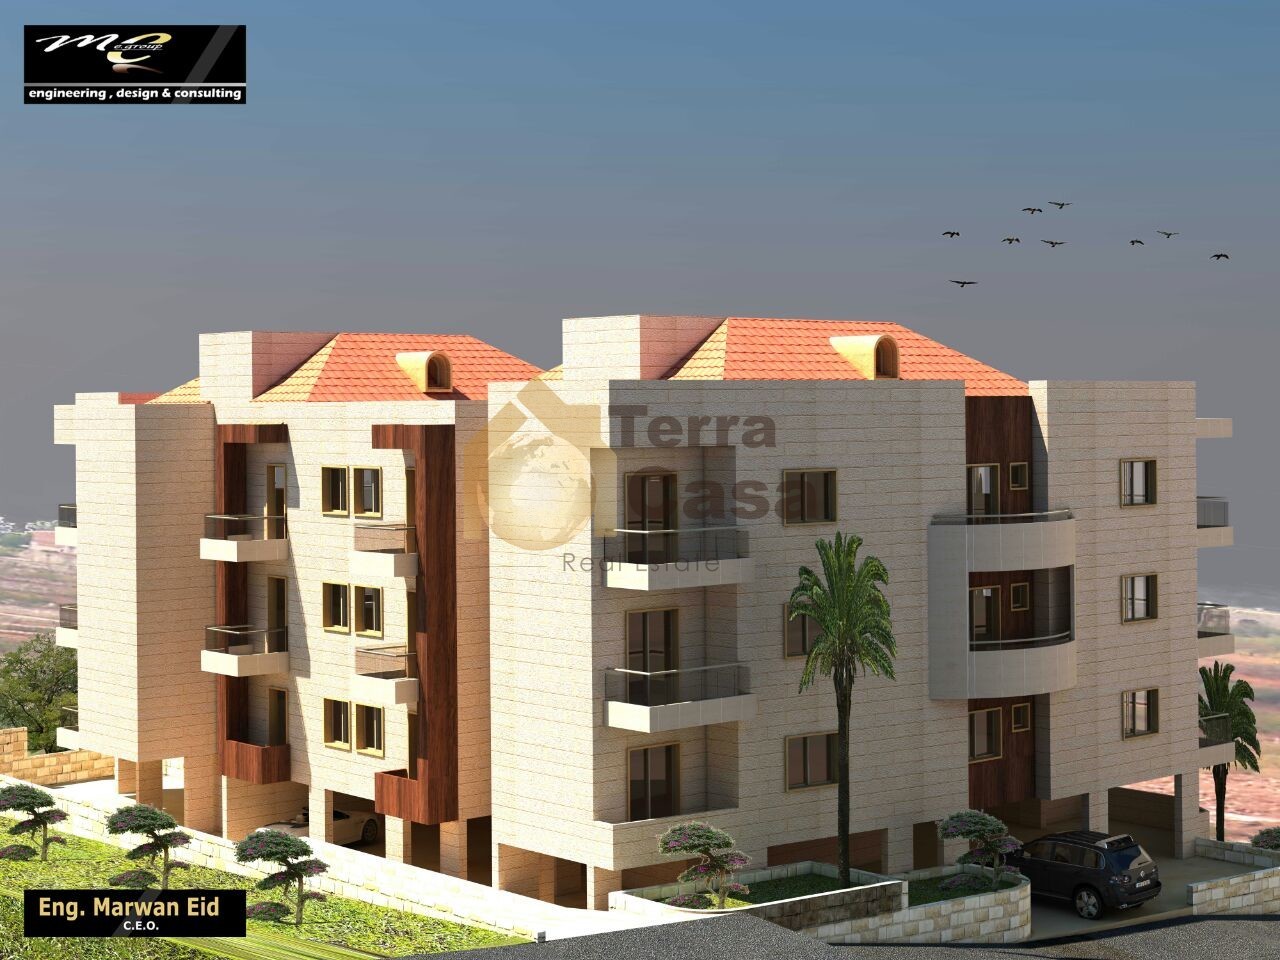 Zahle brand new apartment in a nice neighborhood cash payment.